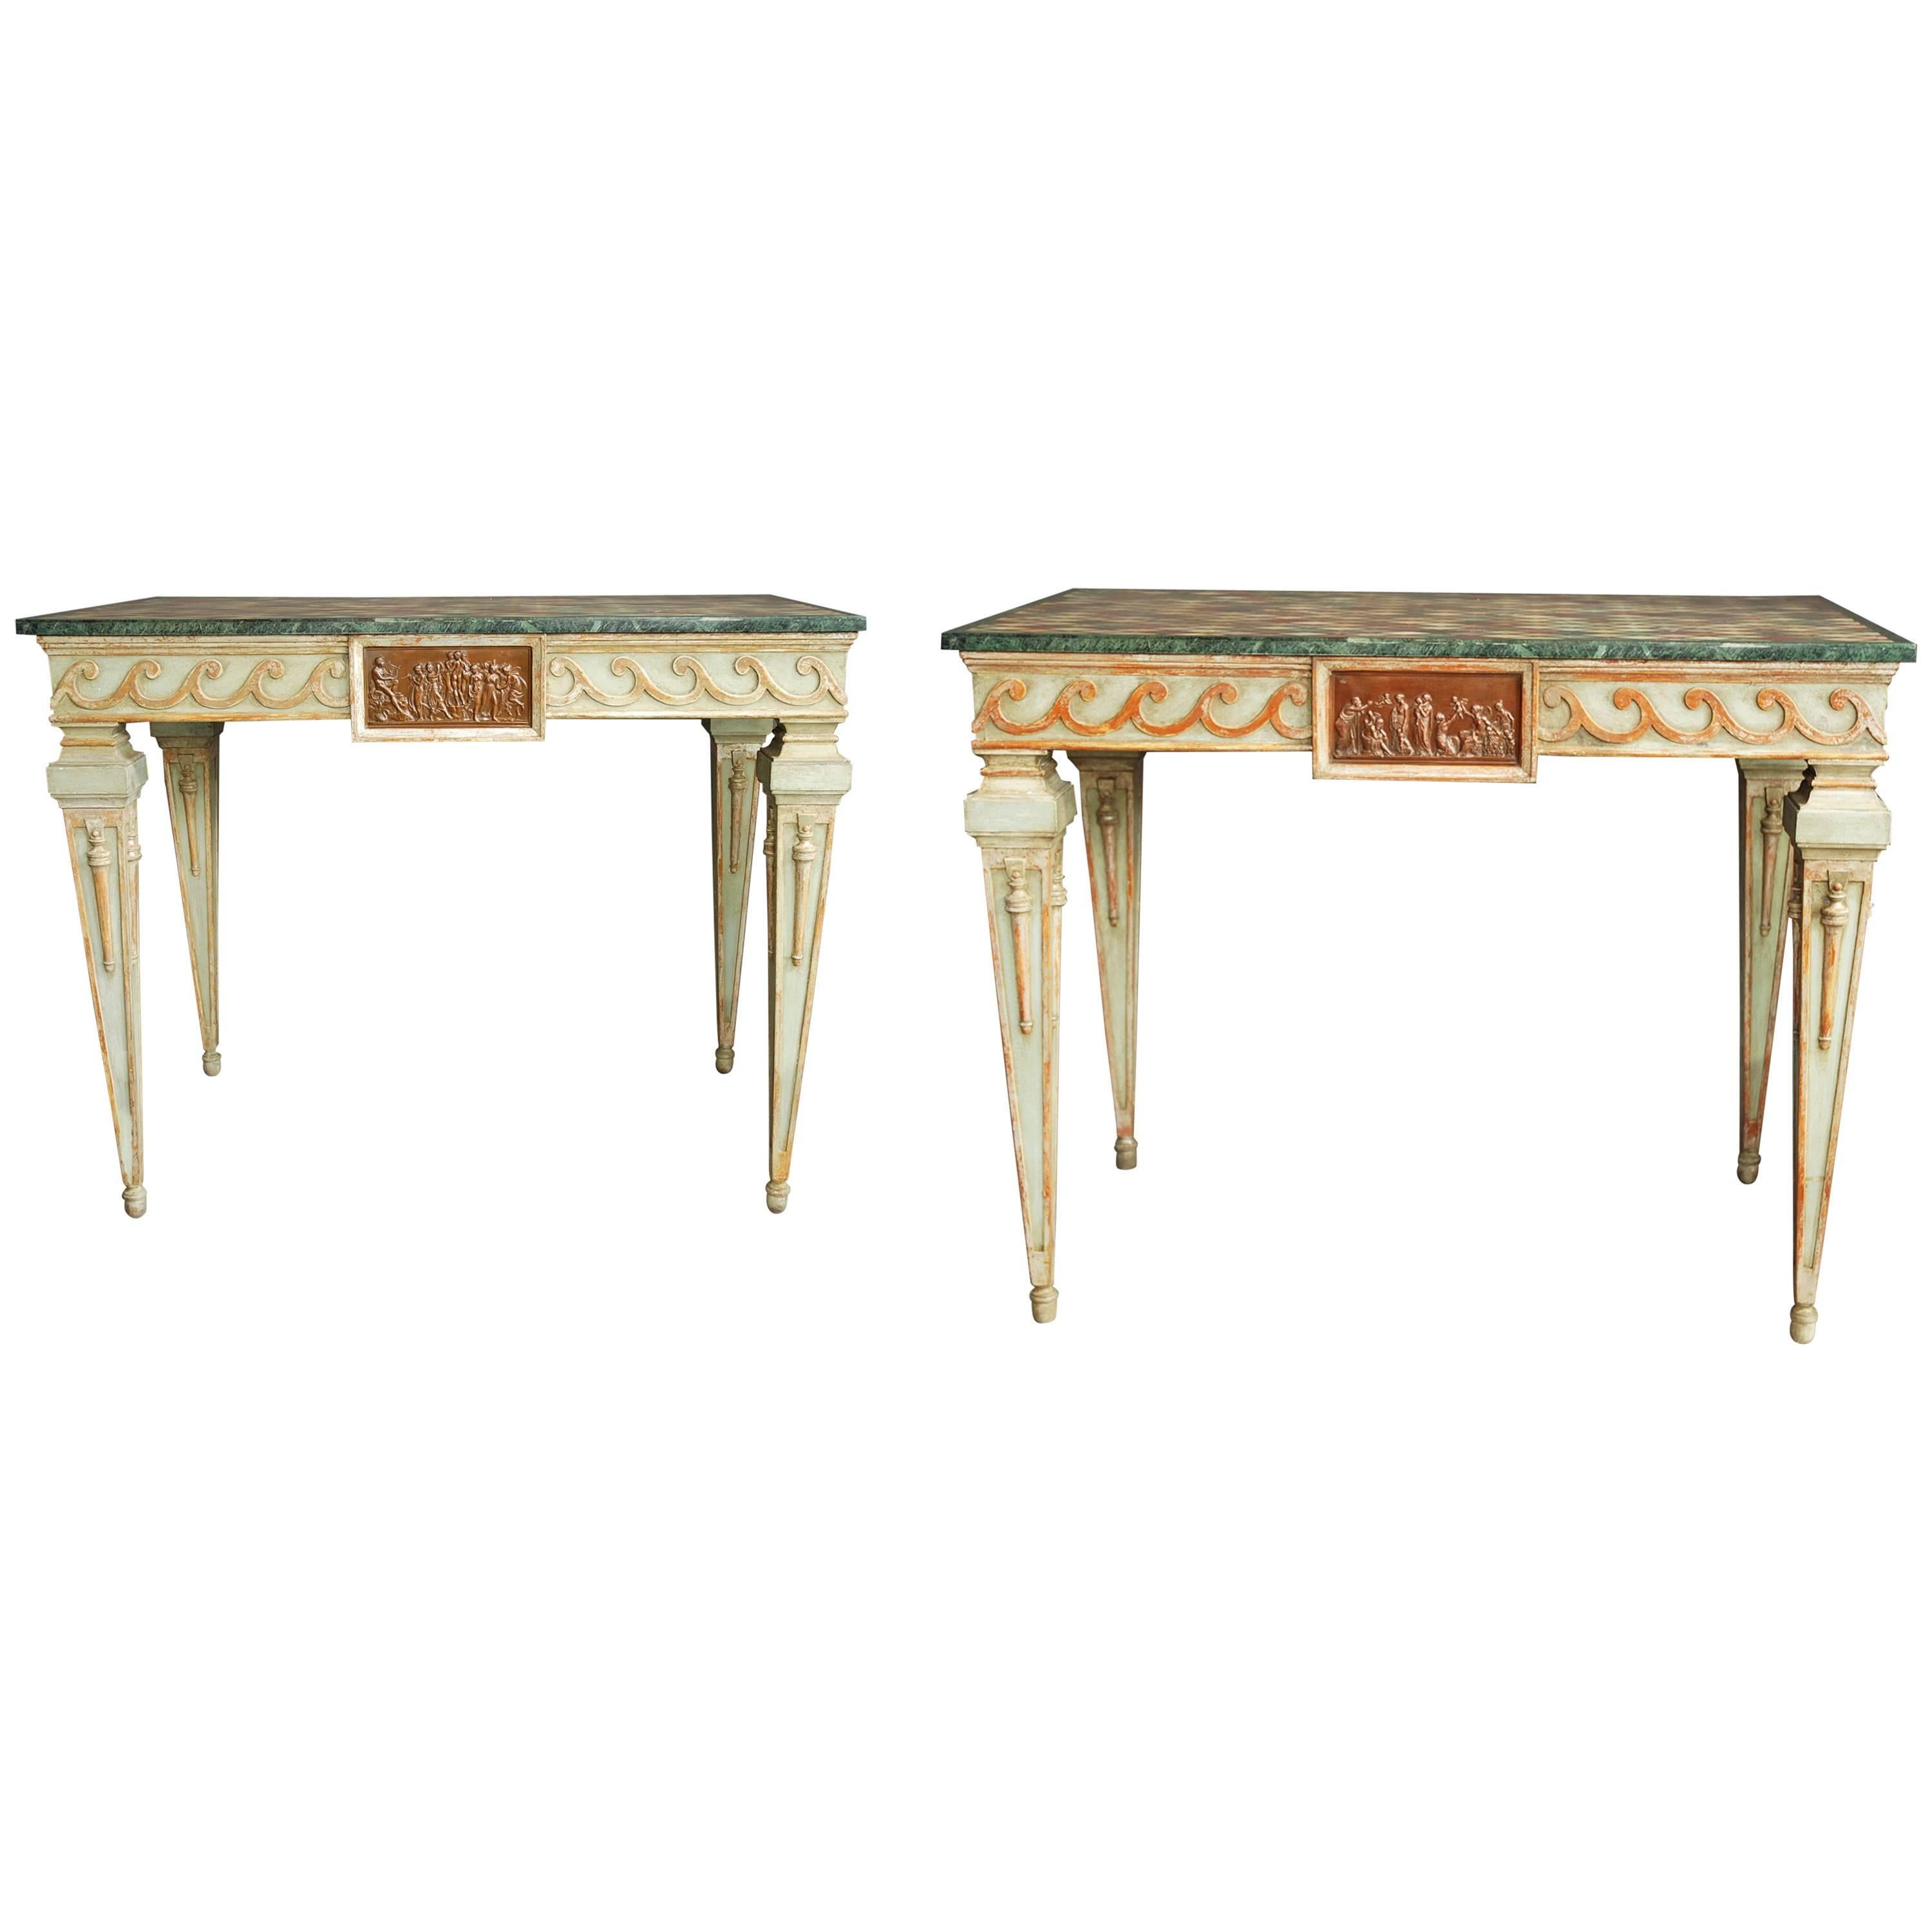 Highly Decorative Pair of Early 20th Century Italian Painted Console Tables For Sale